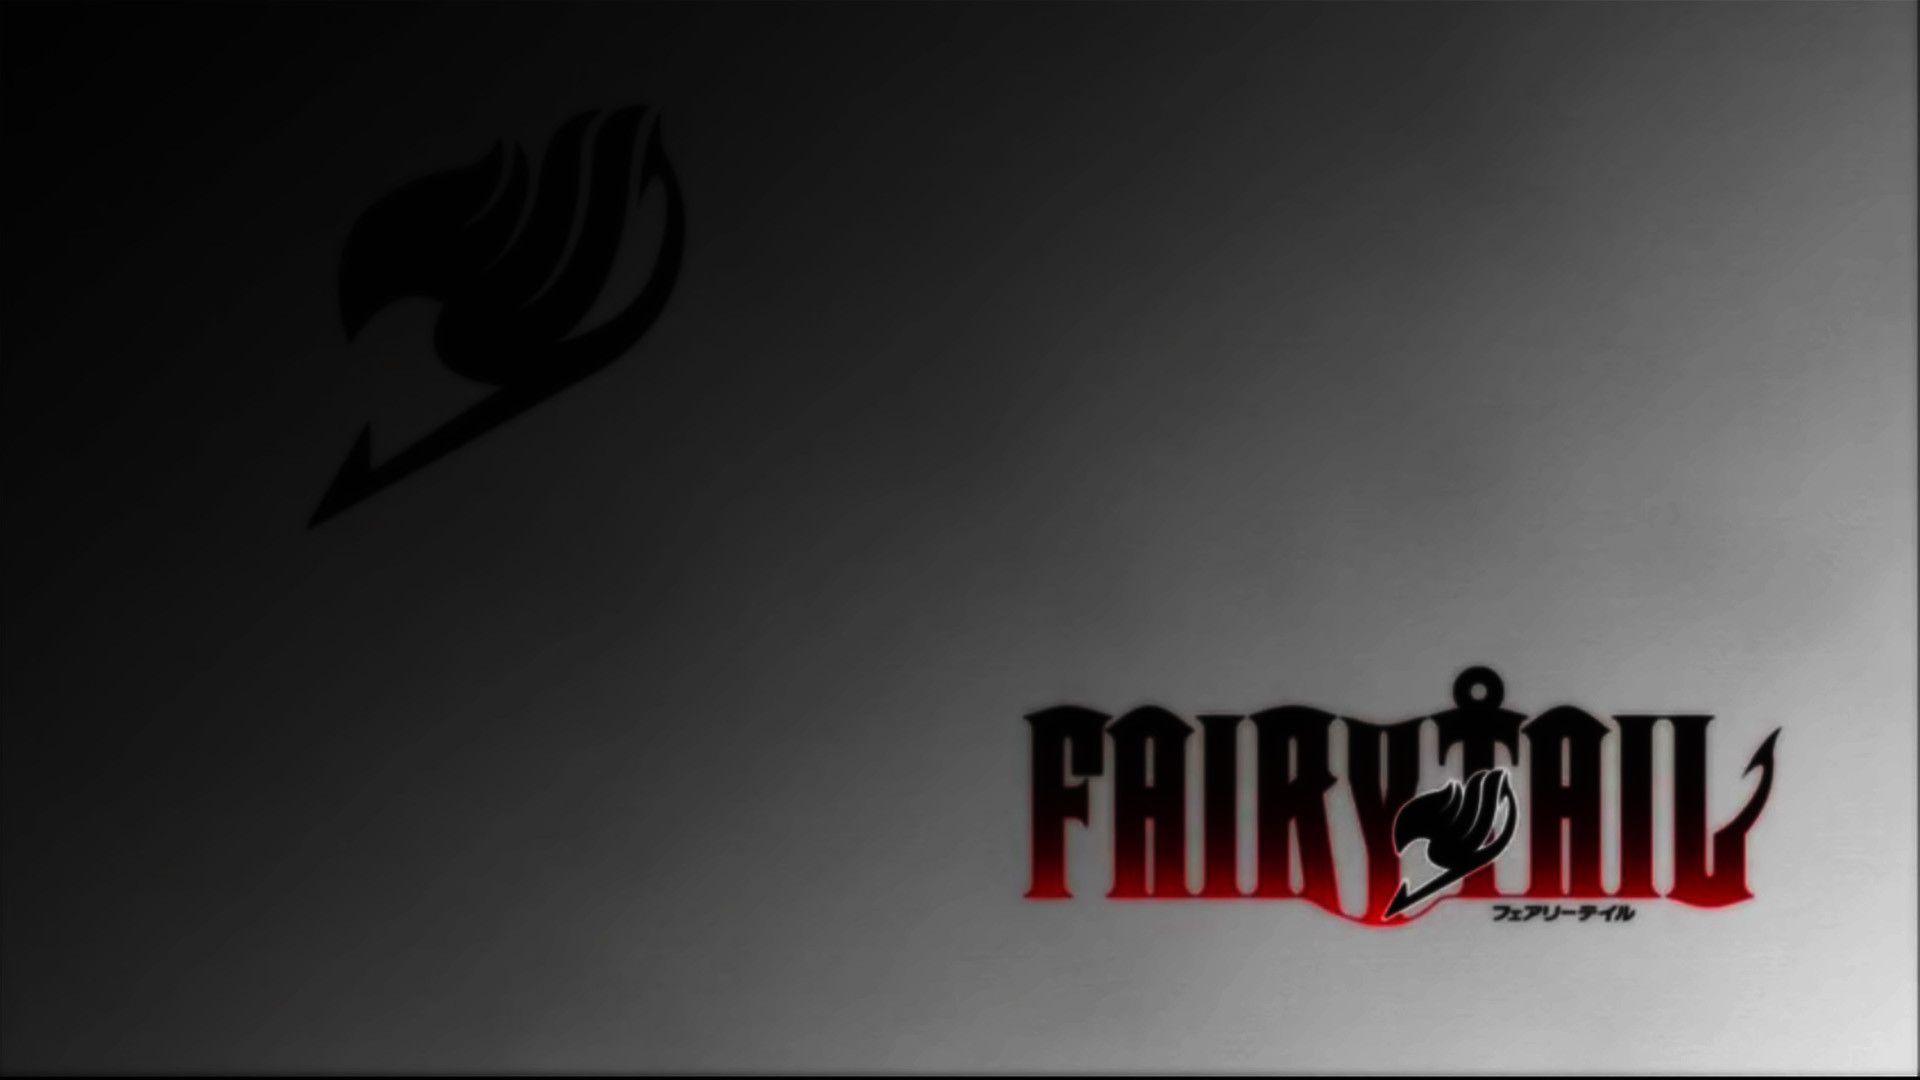 Fairy Tail Symbol Wallpapers Top Free Fairy Tail Symbol Backgrounds Wallpaperaccess